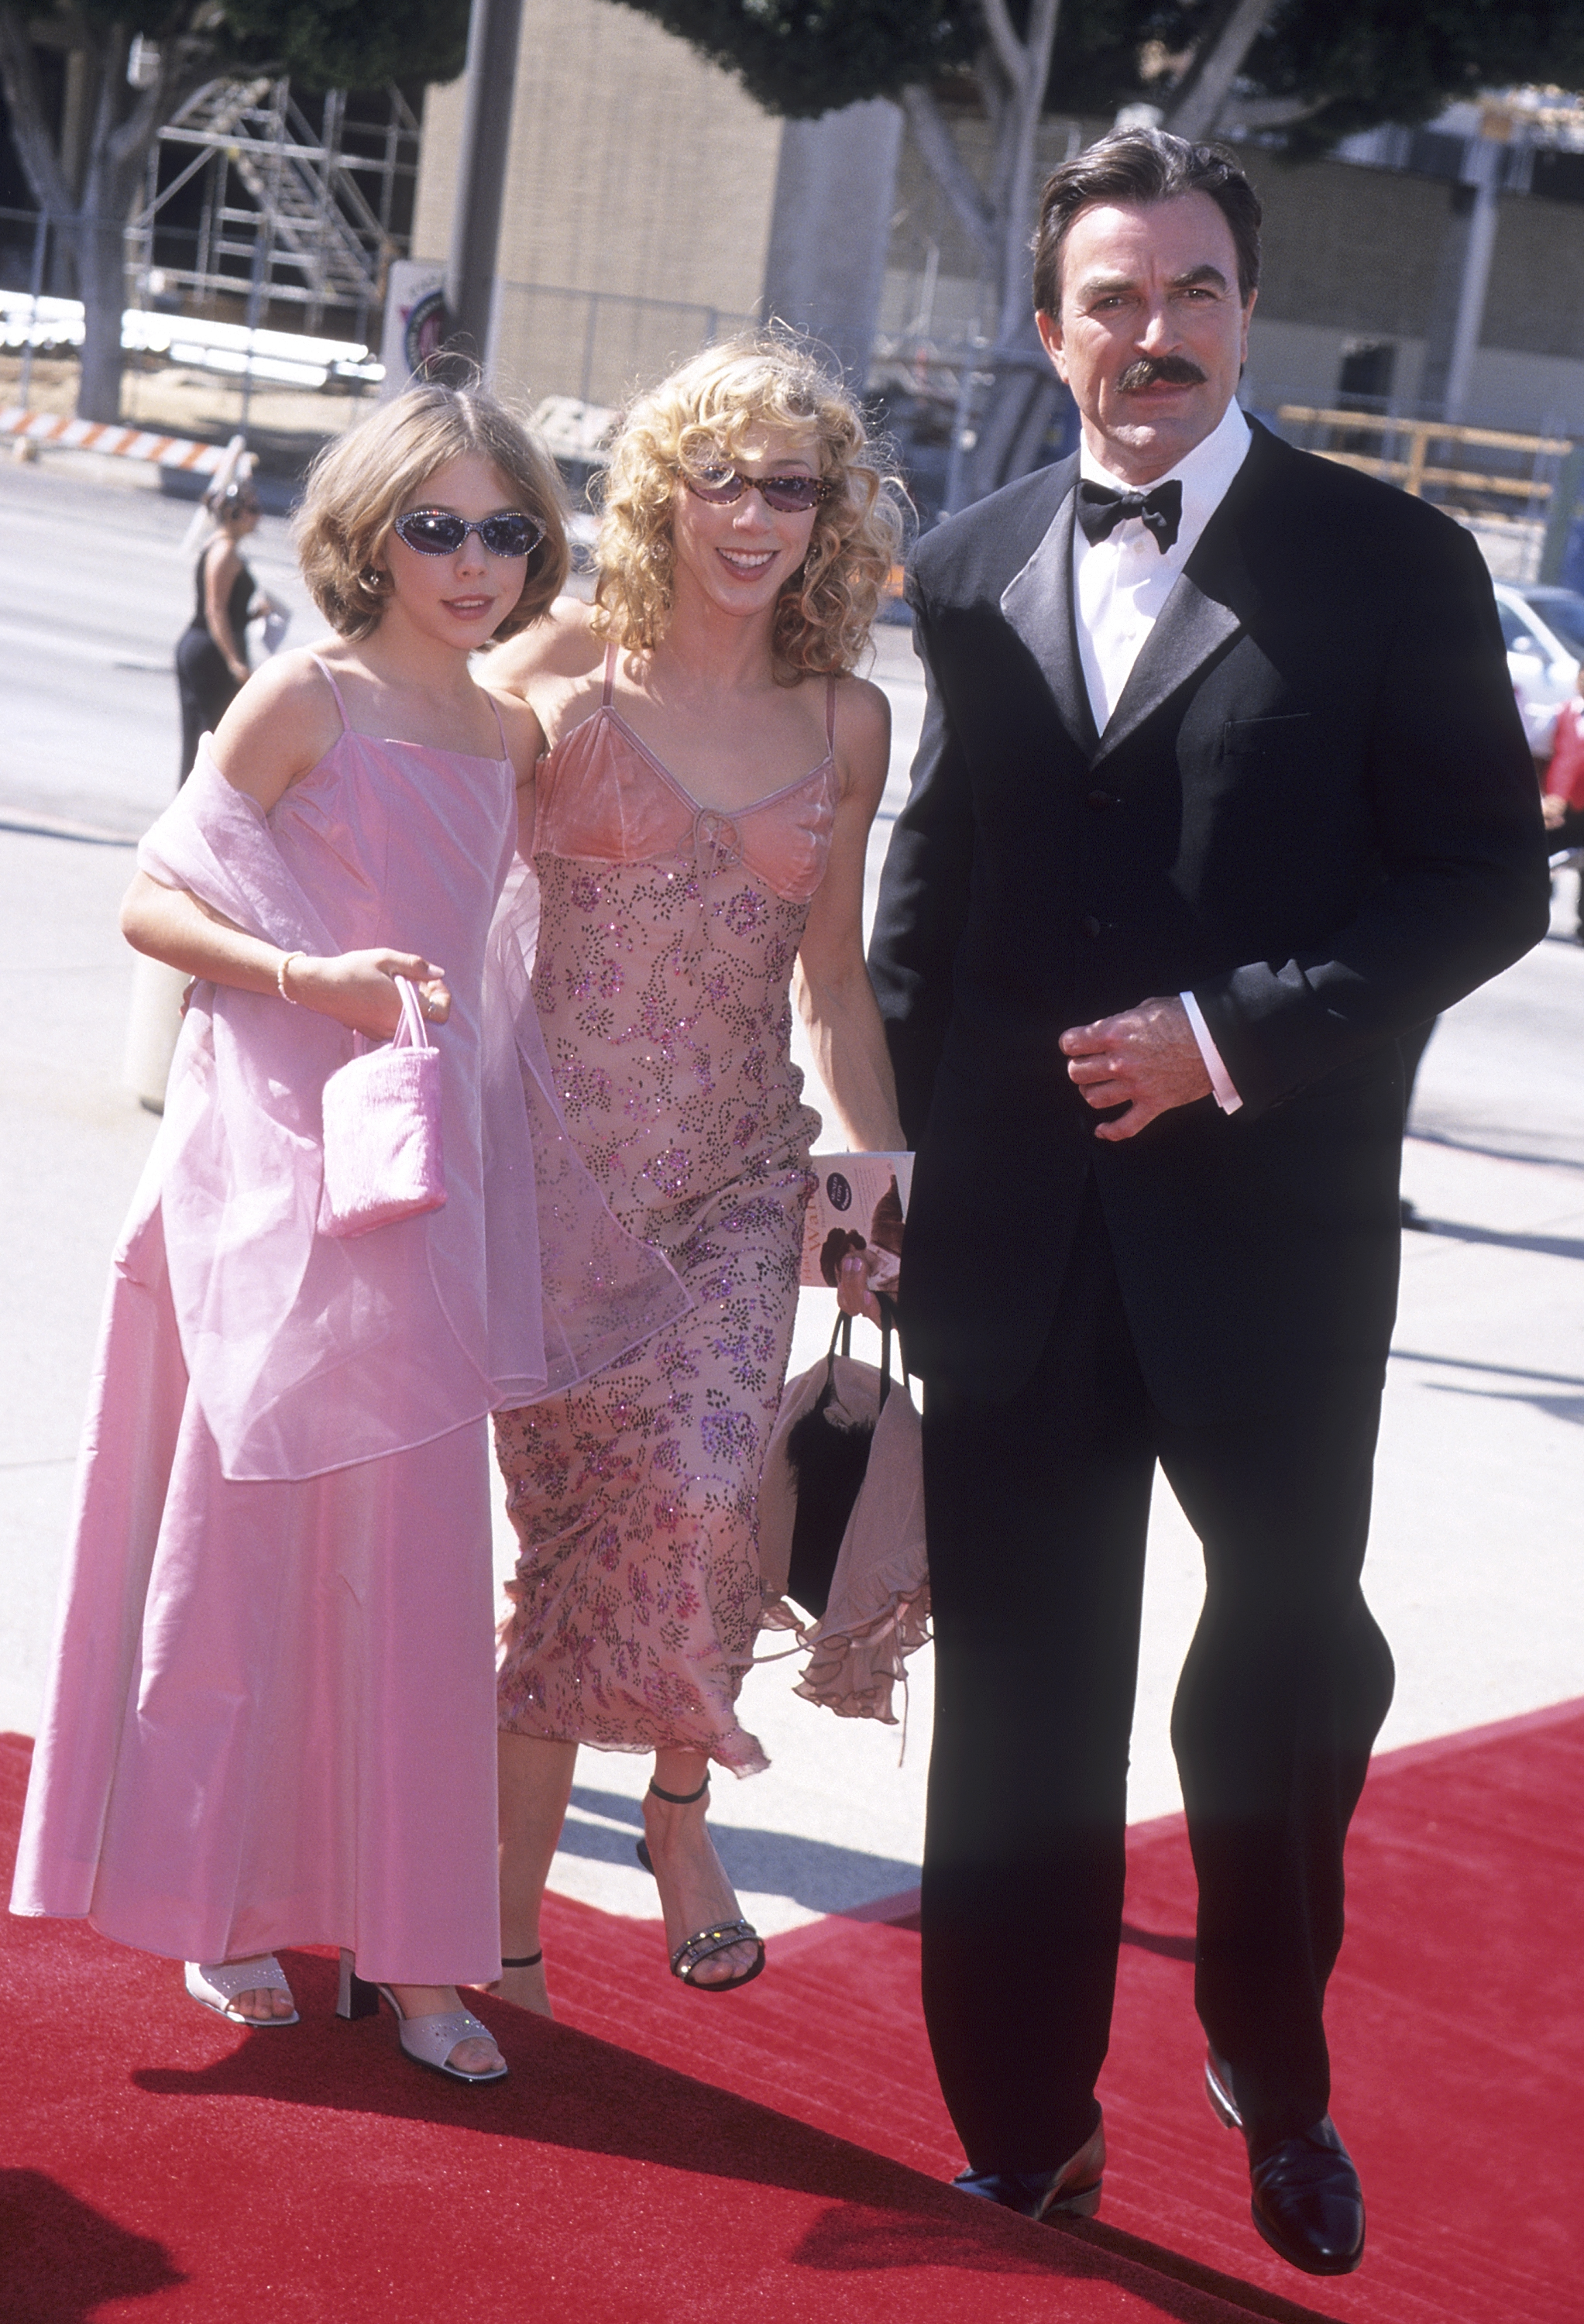 Tom Selleck, Jillie Mack and Hannah Selleck at the 52nd Annual Primetime Emmy Awards at the Pasadena Civic Auditorium on August 26, 2000 in Pasadena, California. | Source: Getty Images